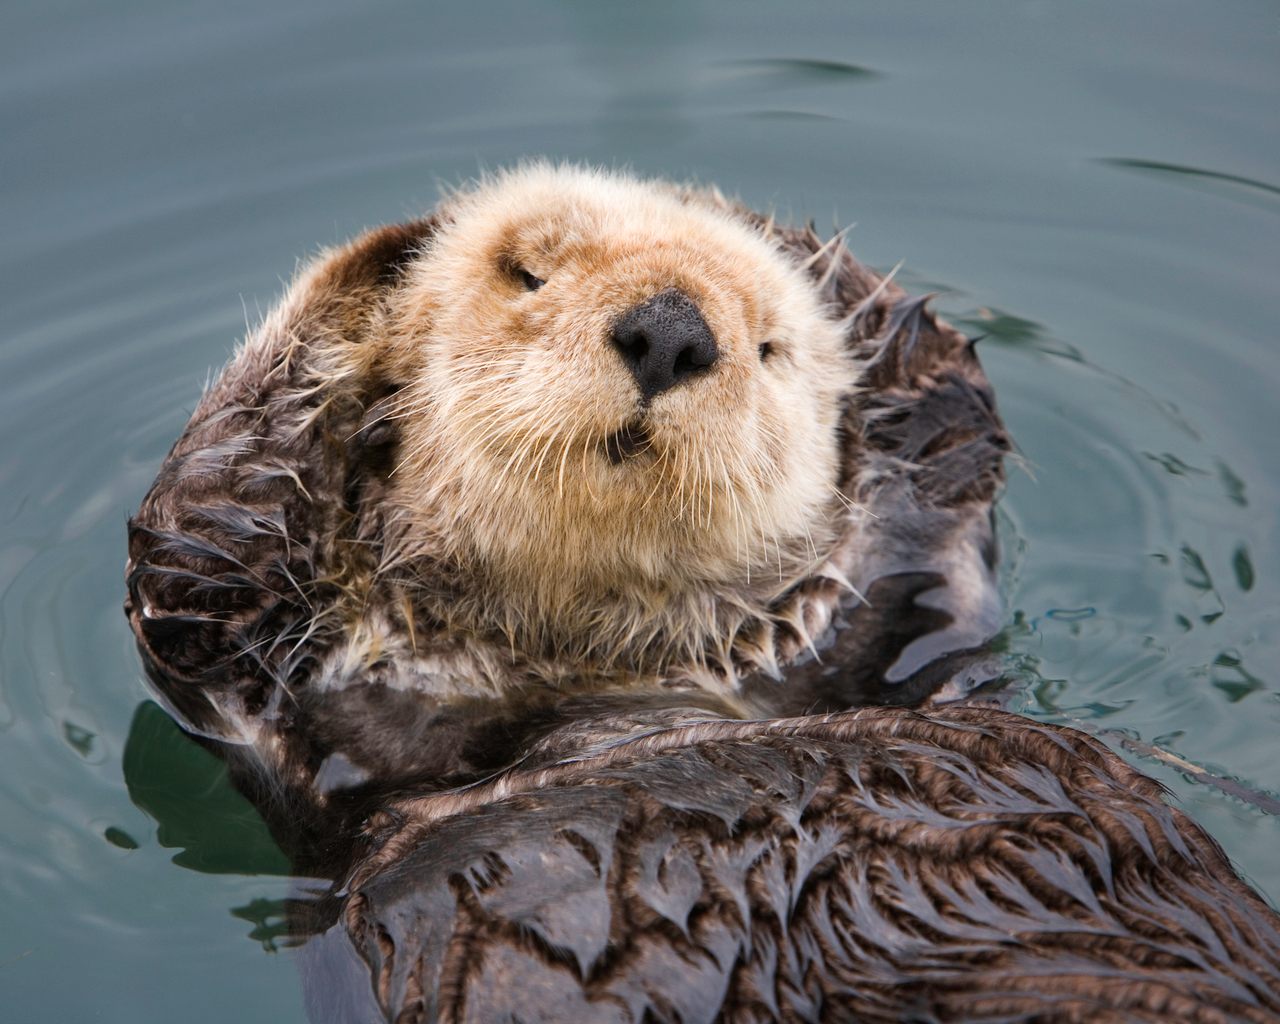 Sea otters, once hunted by humans for their fur and now adored for their cuteness, may be key to saving entire ecosystems.